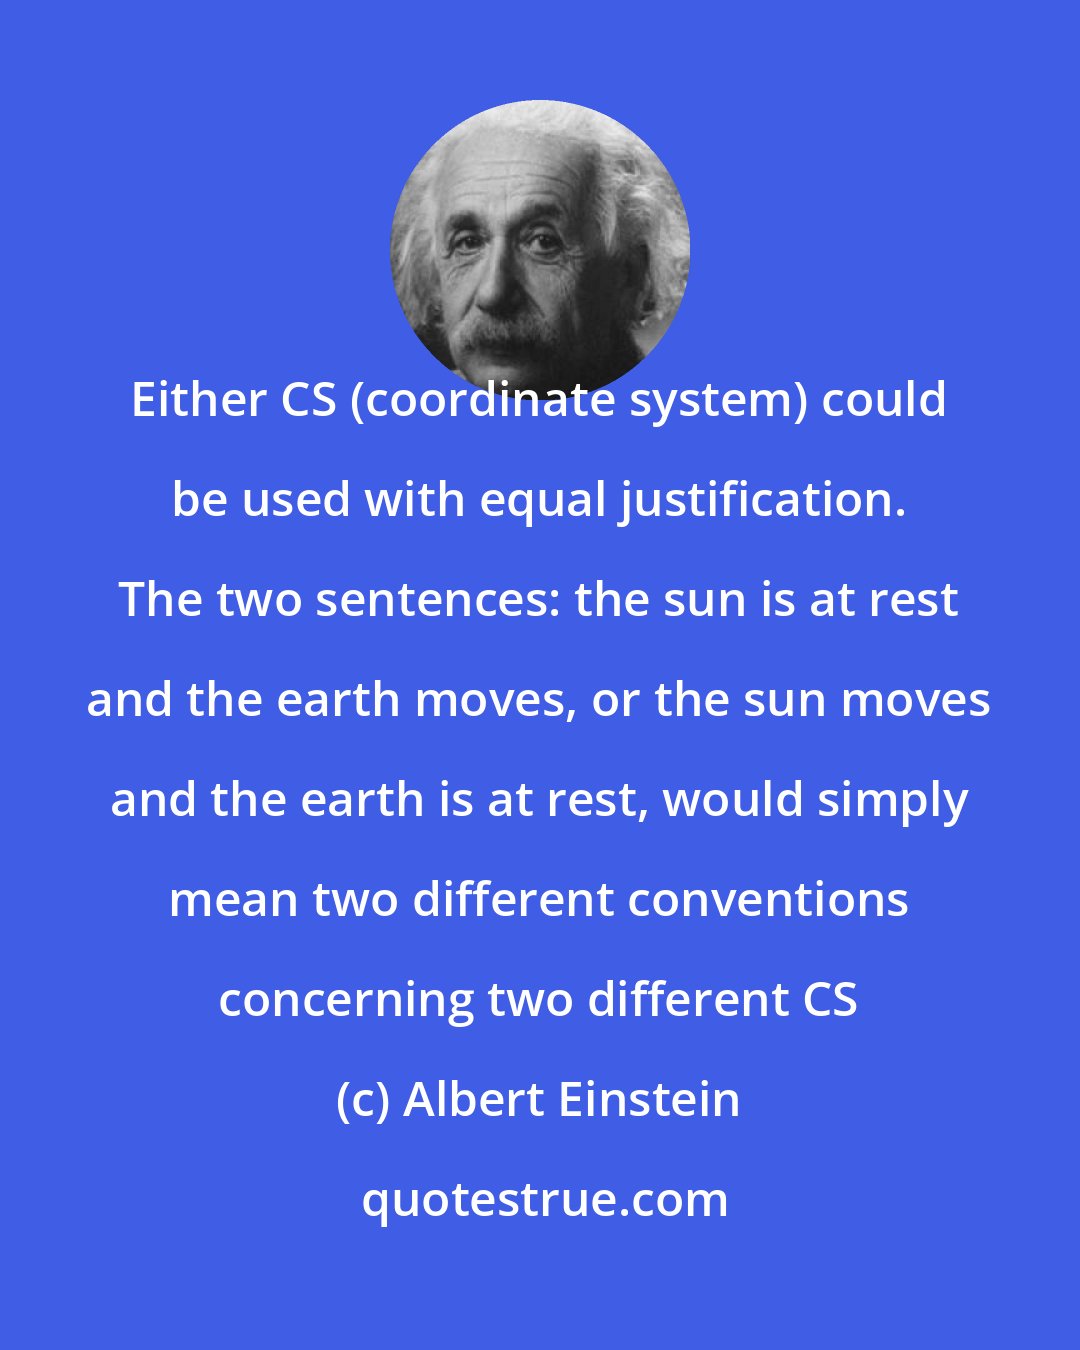 Albert Einstein: Either CS (coordinate system) could be used with equal justification. The two sentences: the sun is at rest and the earth moves, or the sun moves and the earth is at rest, would simply mean two different conventions concerning two different CS